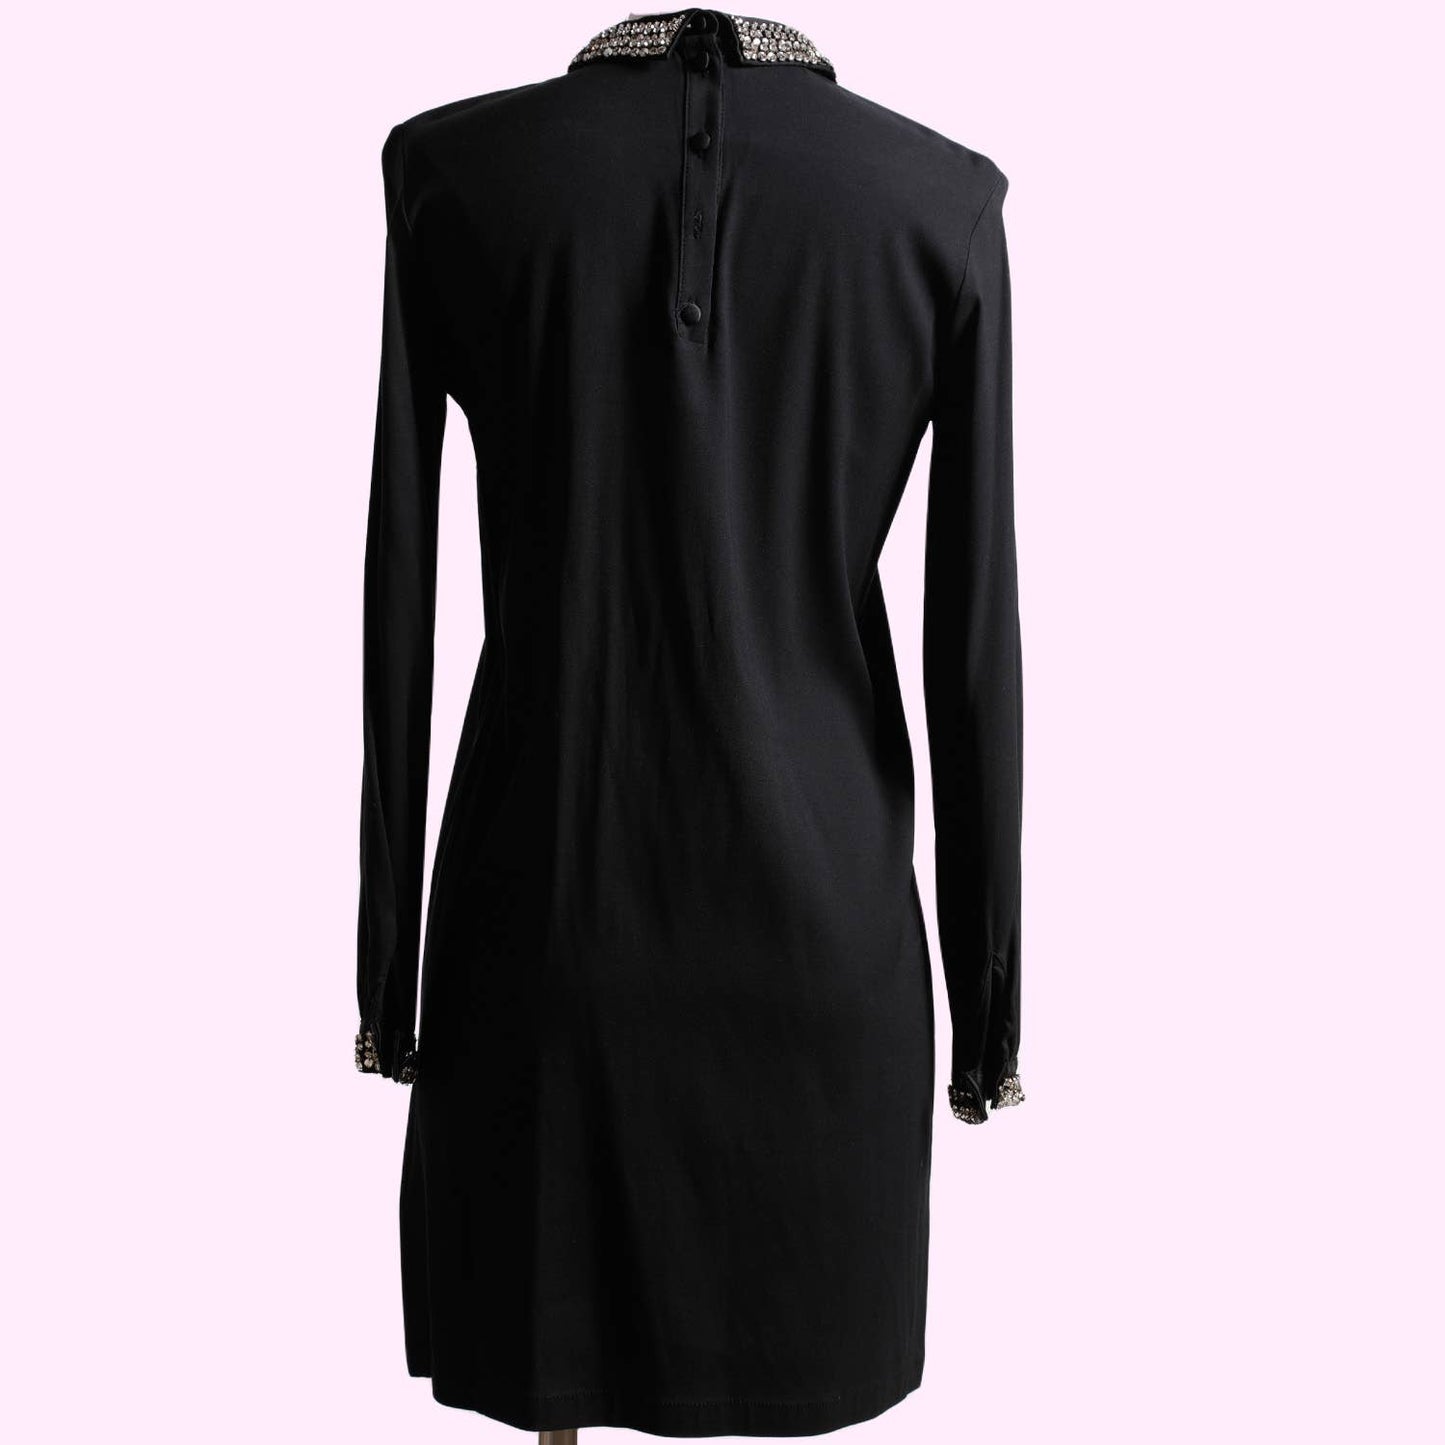 FRENCH CONNECTION Black Long Sleeve Dress with Crystal Collar